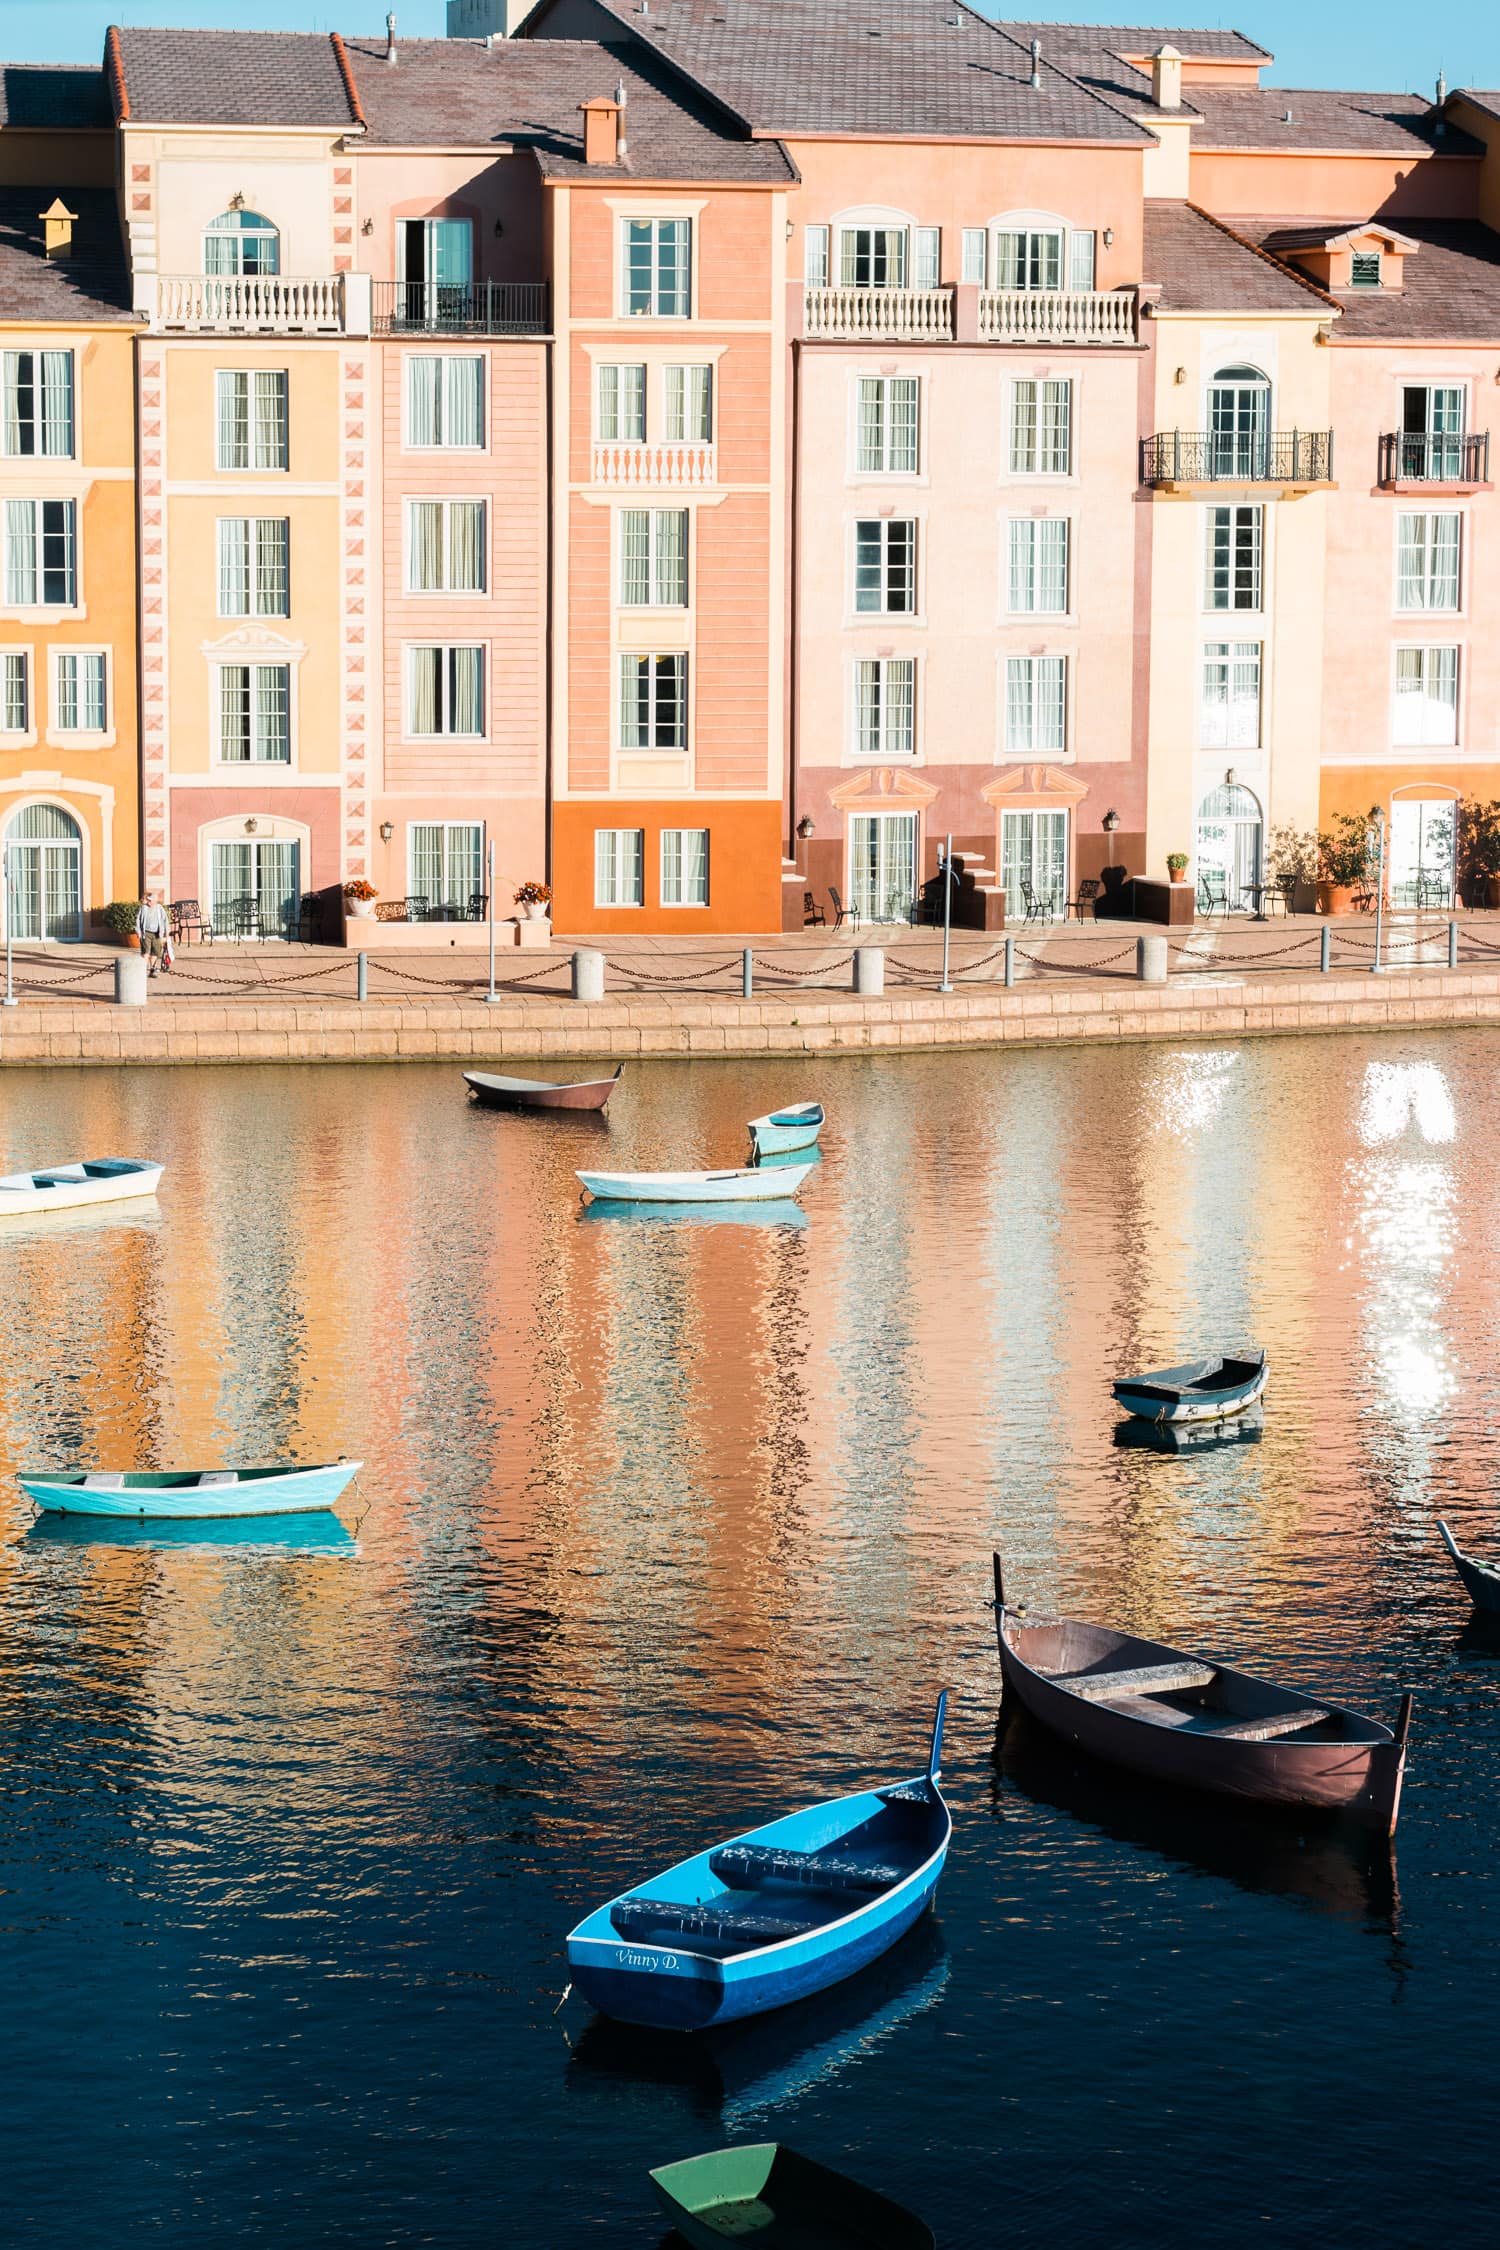 Loews Portofino Bay Hotel at Universal Orlando | Planning a trip to Orlando? I've rounded up the top 10 things to do in Orlando, Florida, that are guaranteed to make your trip a success. Whether you're moving to Orlando or just headed in on vacation, you will LOVE this list of fun activities in Orlando by Florida travel blogger Ashley Brooke Nicholas #CORTatHome sponsored by CORT Furniture | affordable travel tips, orlando vacation tips, florida travel, vacation tip